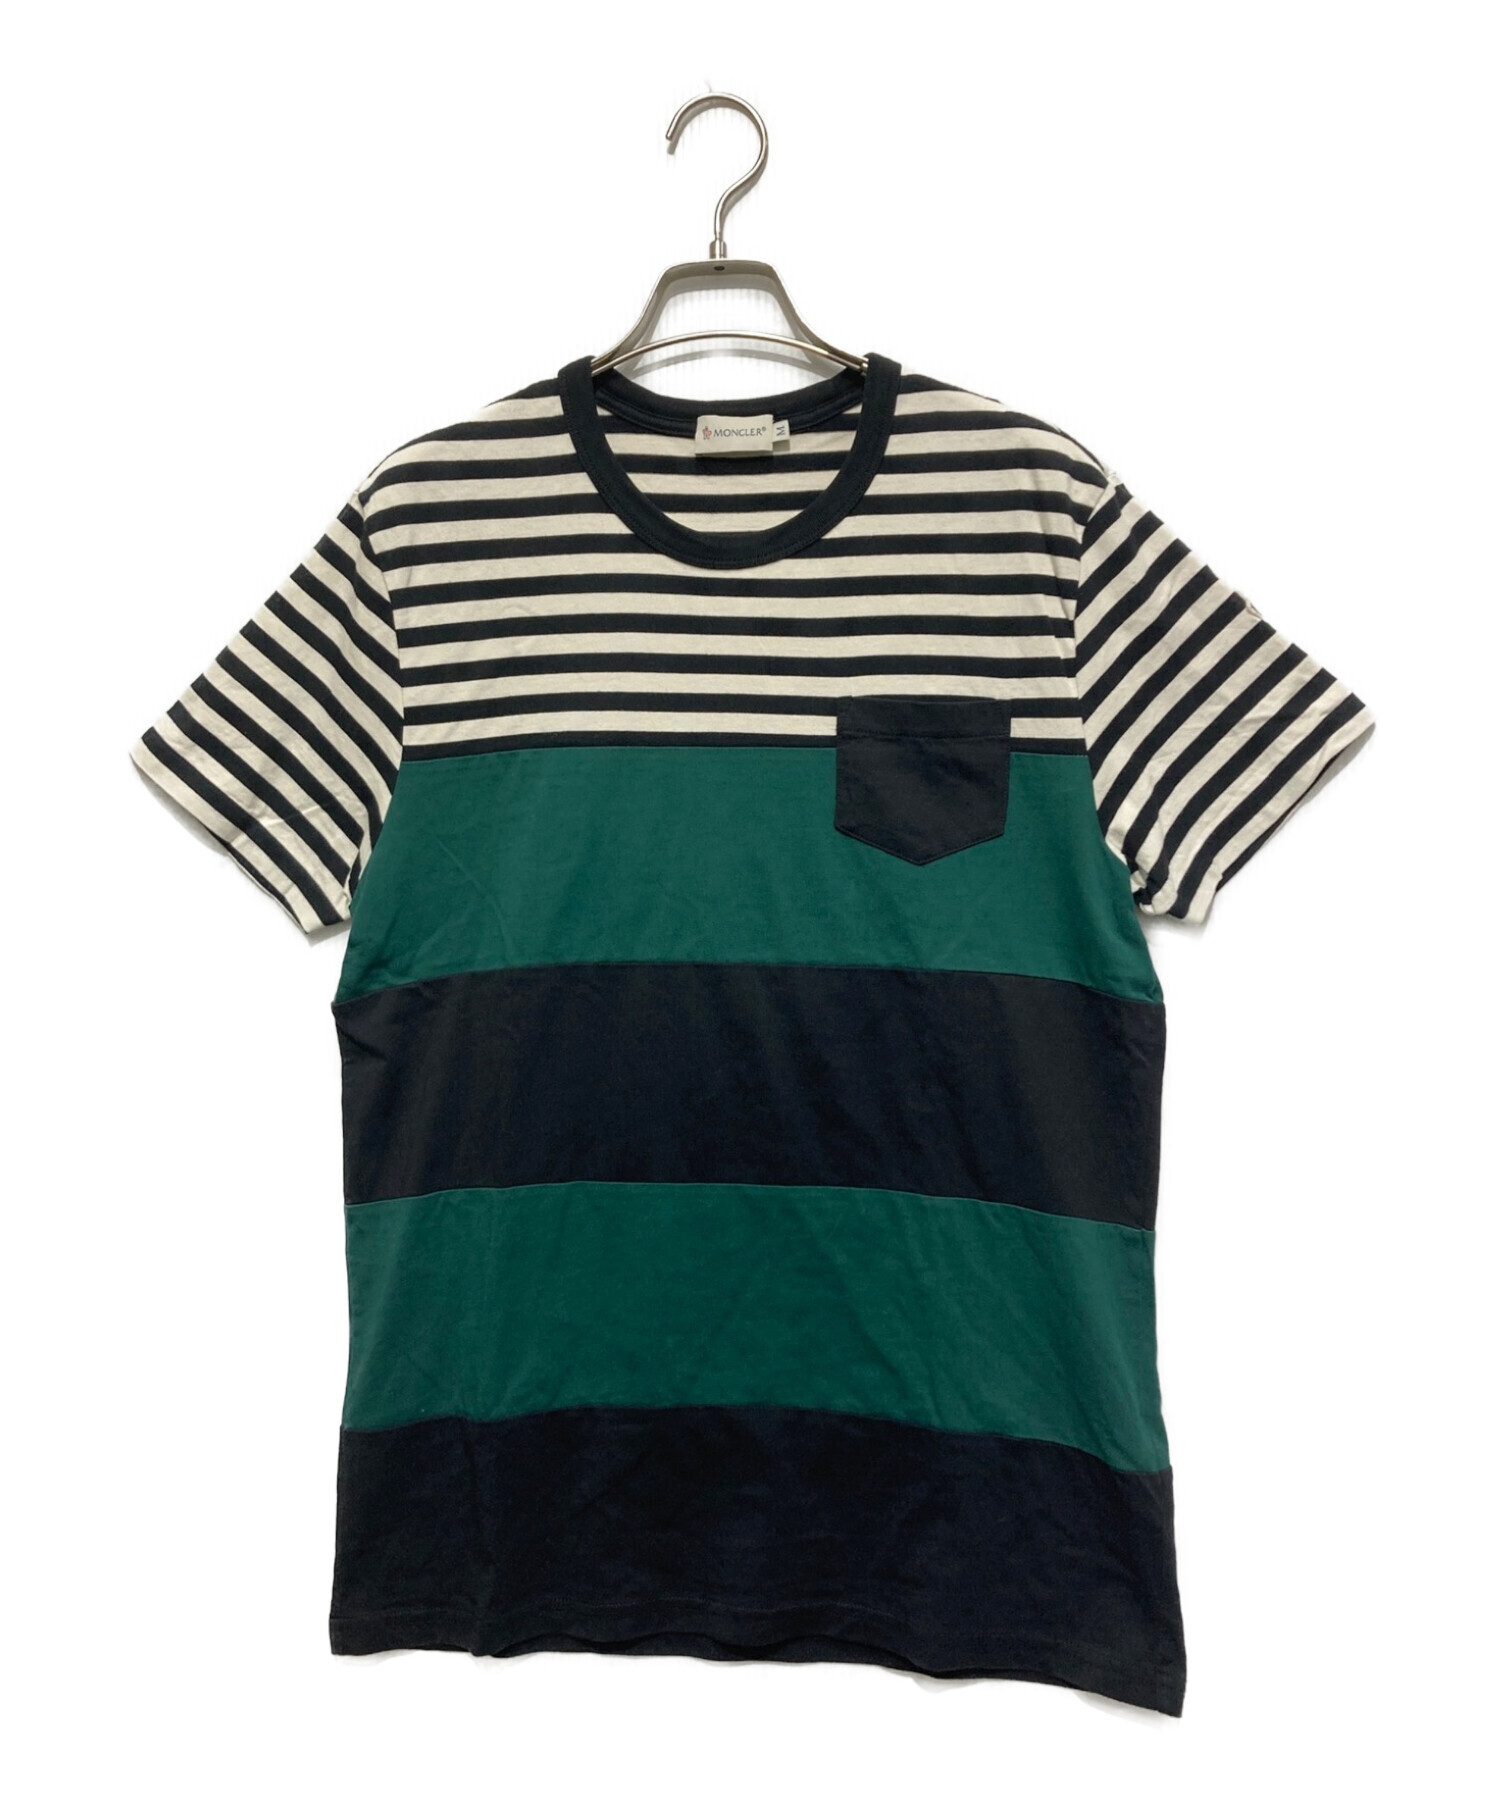 MONCLER MAGLIA T-SHIRT モンクレール ボーダー Tシャツ